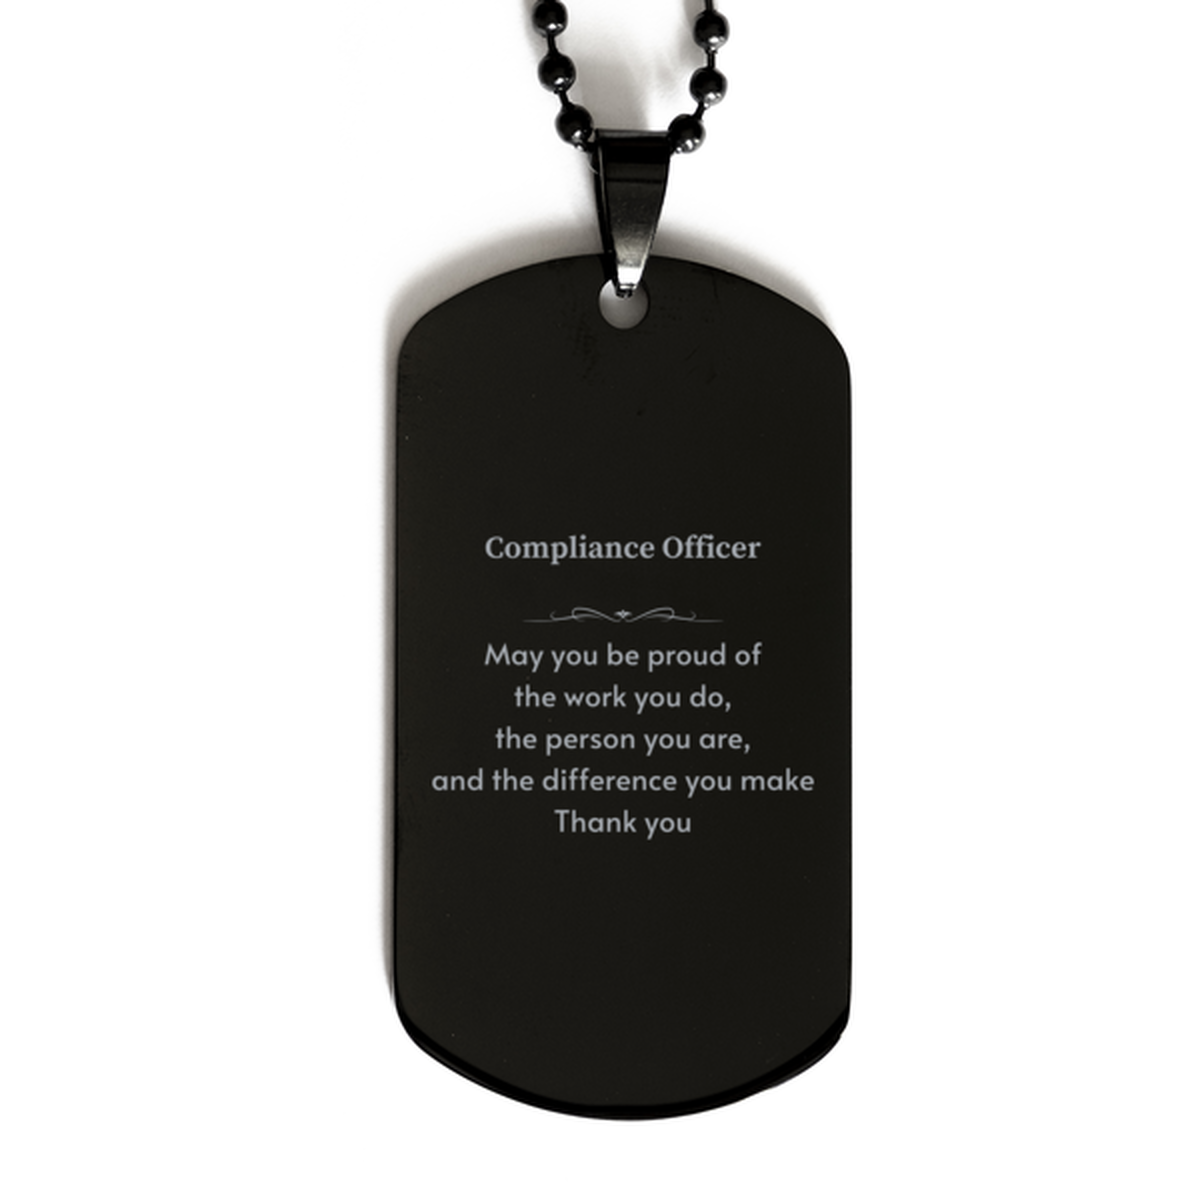 Heartwarming Black Dog Tag Retirement Coworkers Gifts for Compliance Officer, Compliance Officer May You be proud of the work you do, the person you are Gifts for Boss Men Women Friends